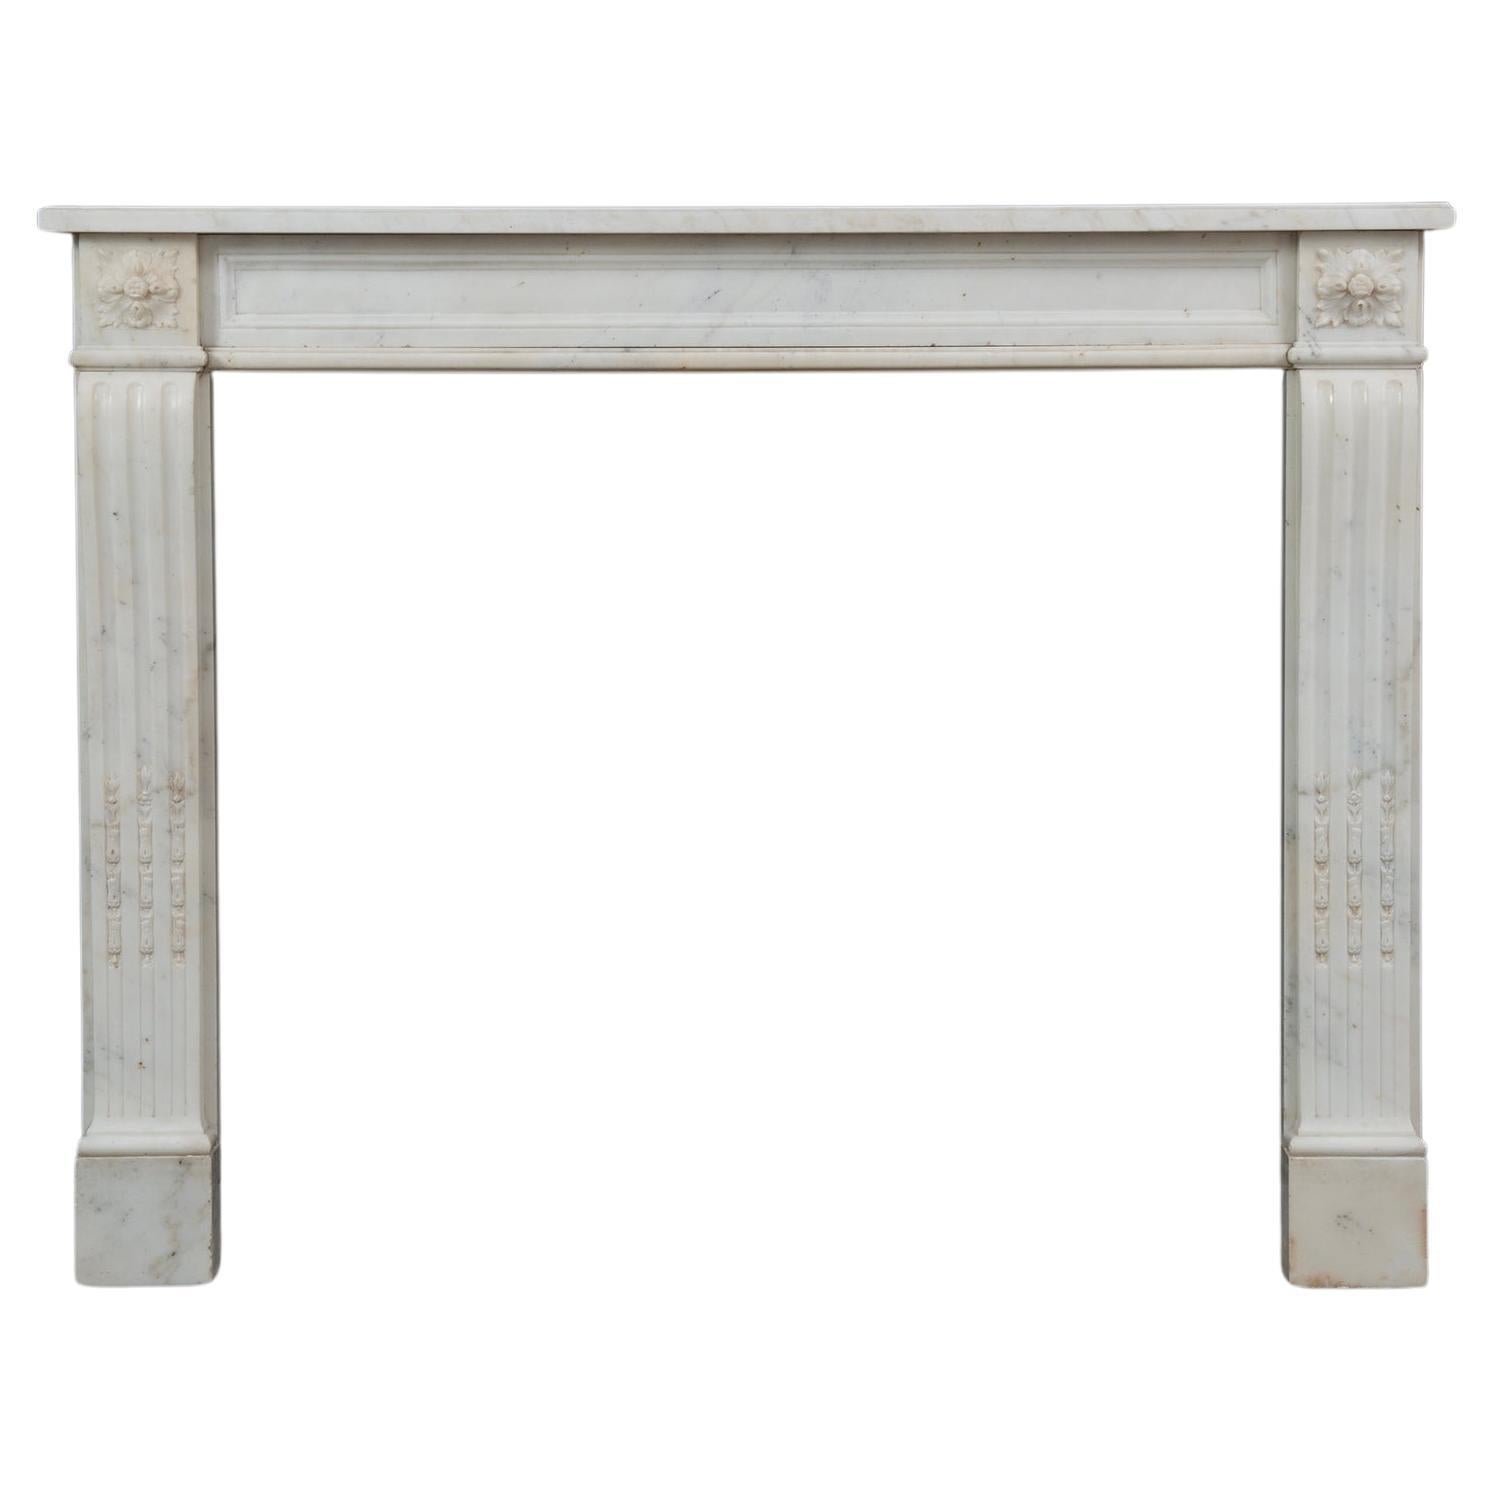 Delightful French Louis XVI Style Fireplace Mantel